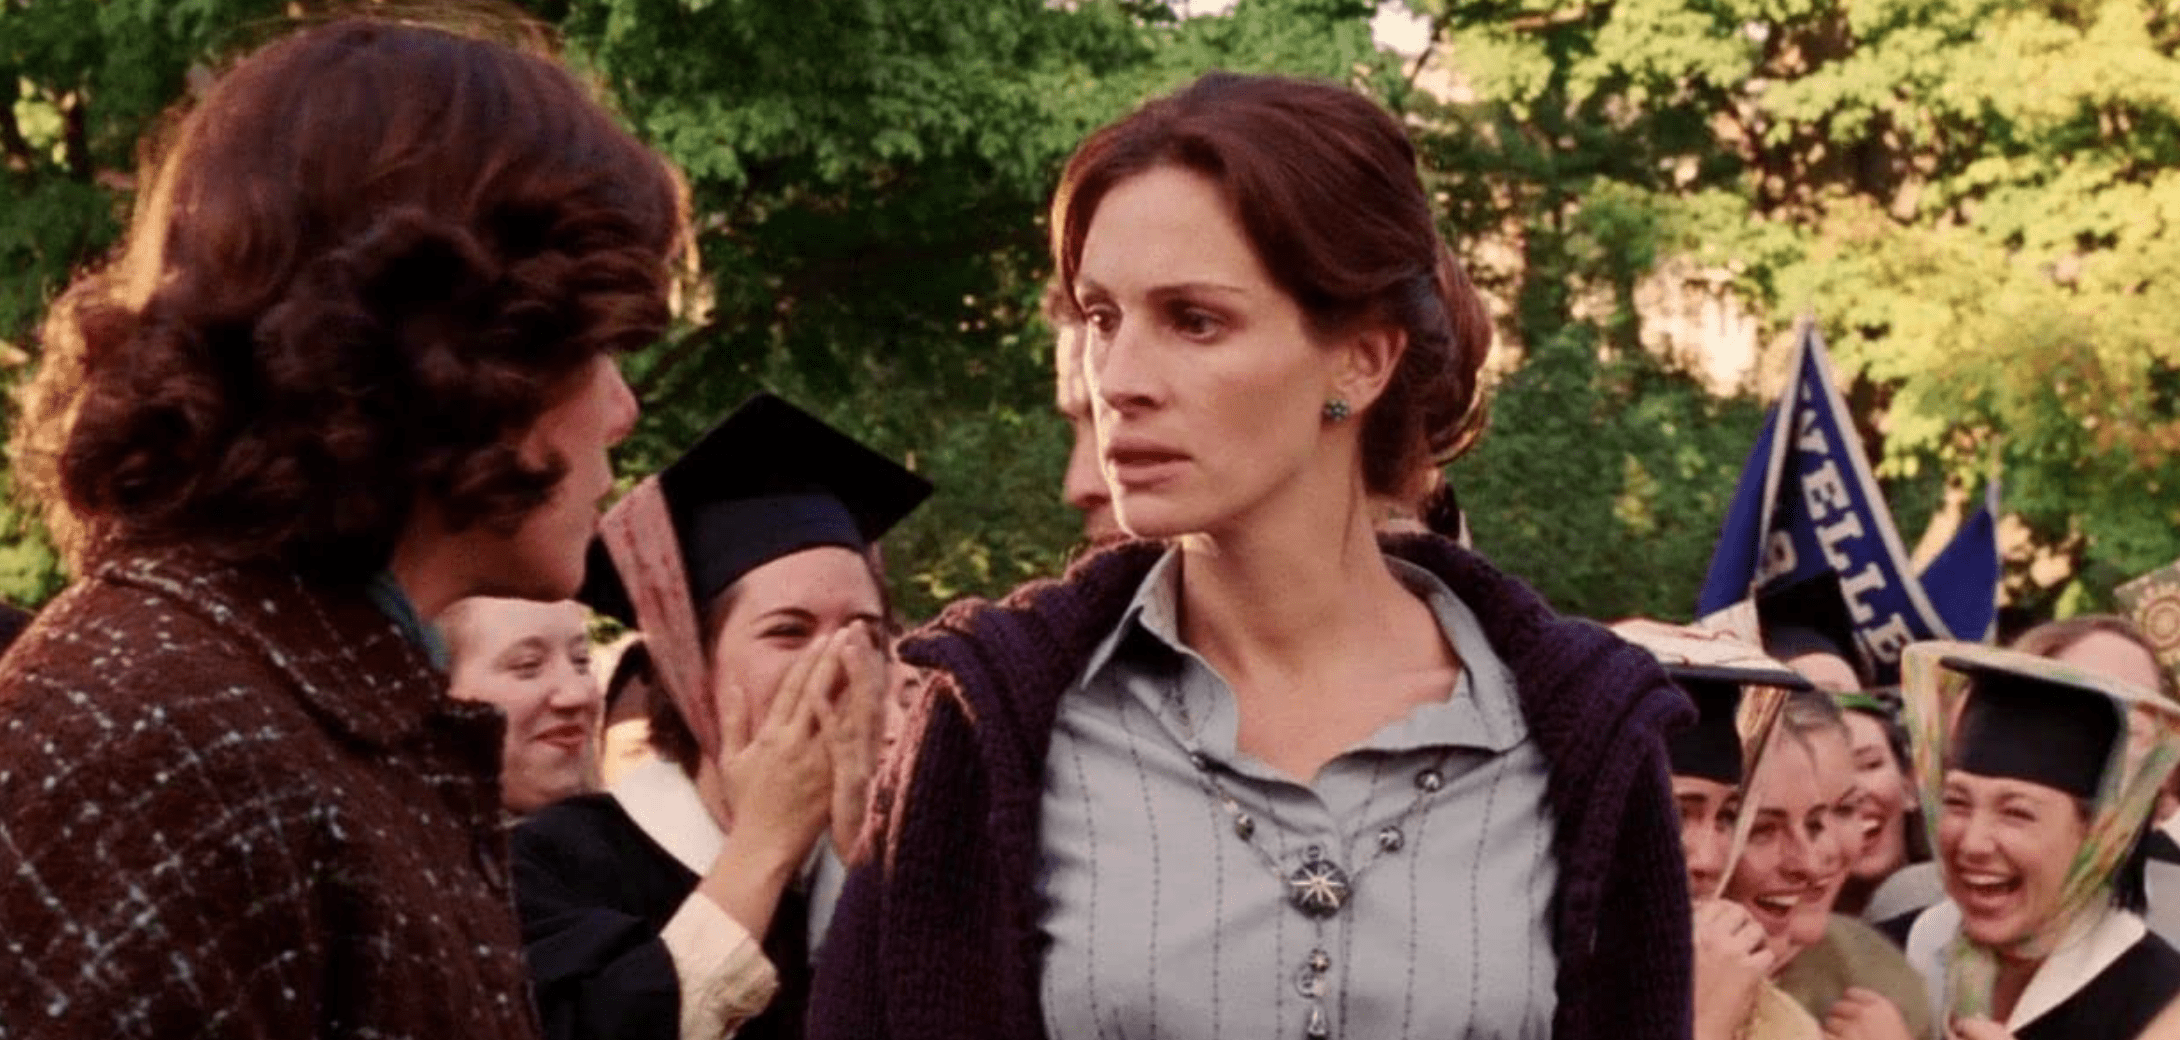 A female teacher is surrounded by students in graduation caps in this image from HBO Max.